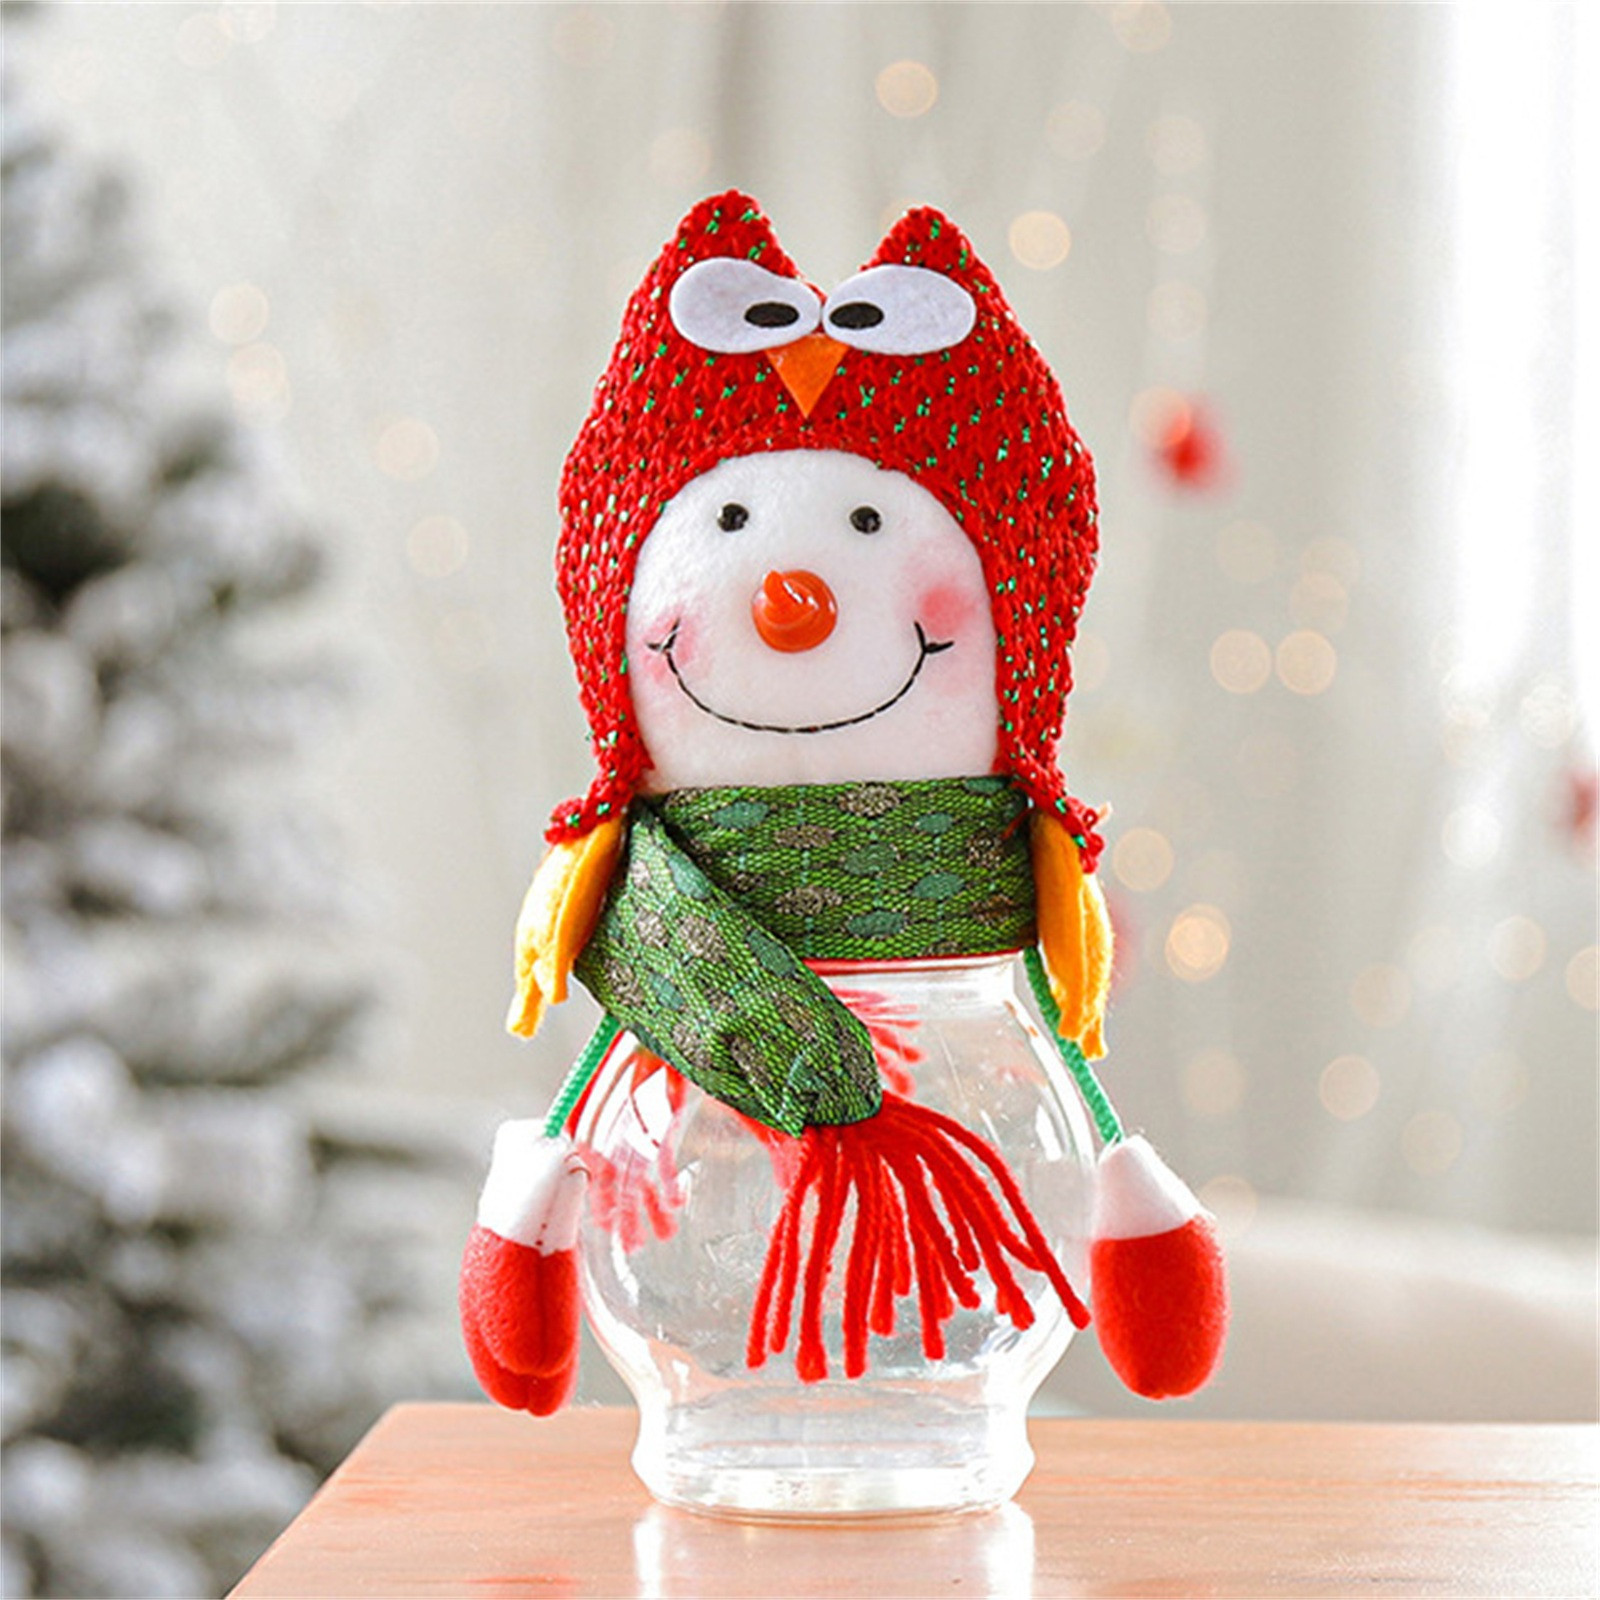 EQWLJWE Christmas Clear Candy Jar Christmas Candy Jar Cookie and Gift Container Bottle Jar Santa Claus Snowman Elk Transparent Ball Candy Jar Christmas Chocolate Storage Jar Container Snowman - image 4 of 4